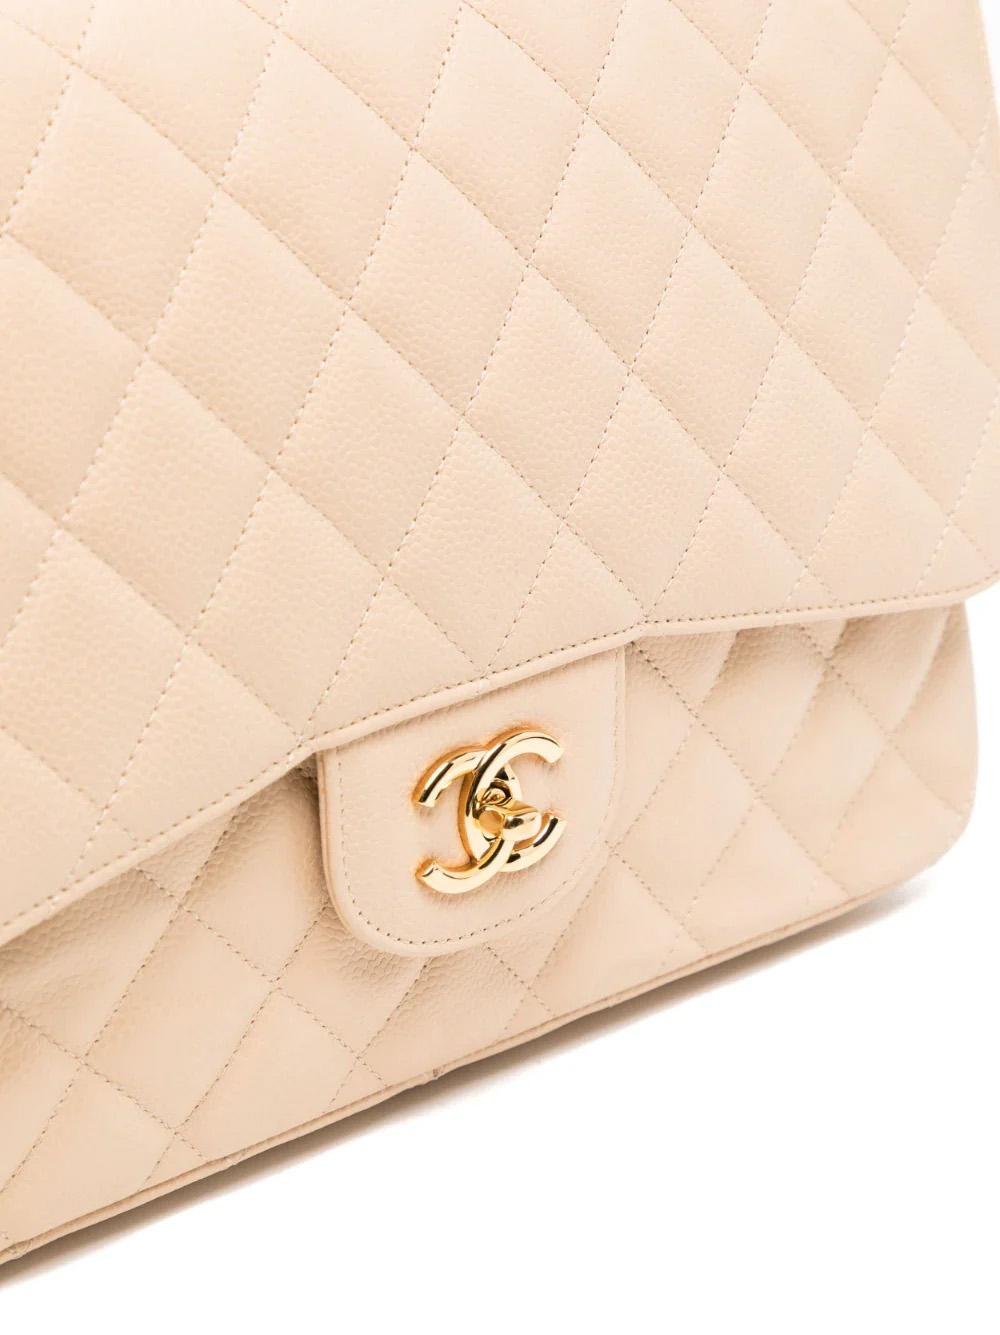 This classic flap jumbo shoulder bag is made from luxurious beige caviar leather with diamond quilting. It features a leather and chain-link shoulder strap, front flap closure with a signature interlocking CC turn-lock fastening, and gold-tone